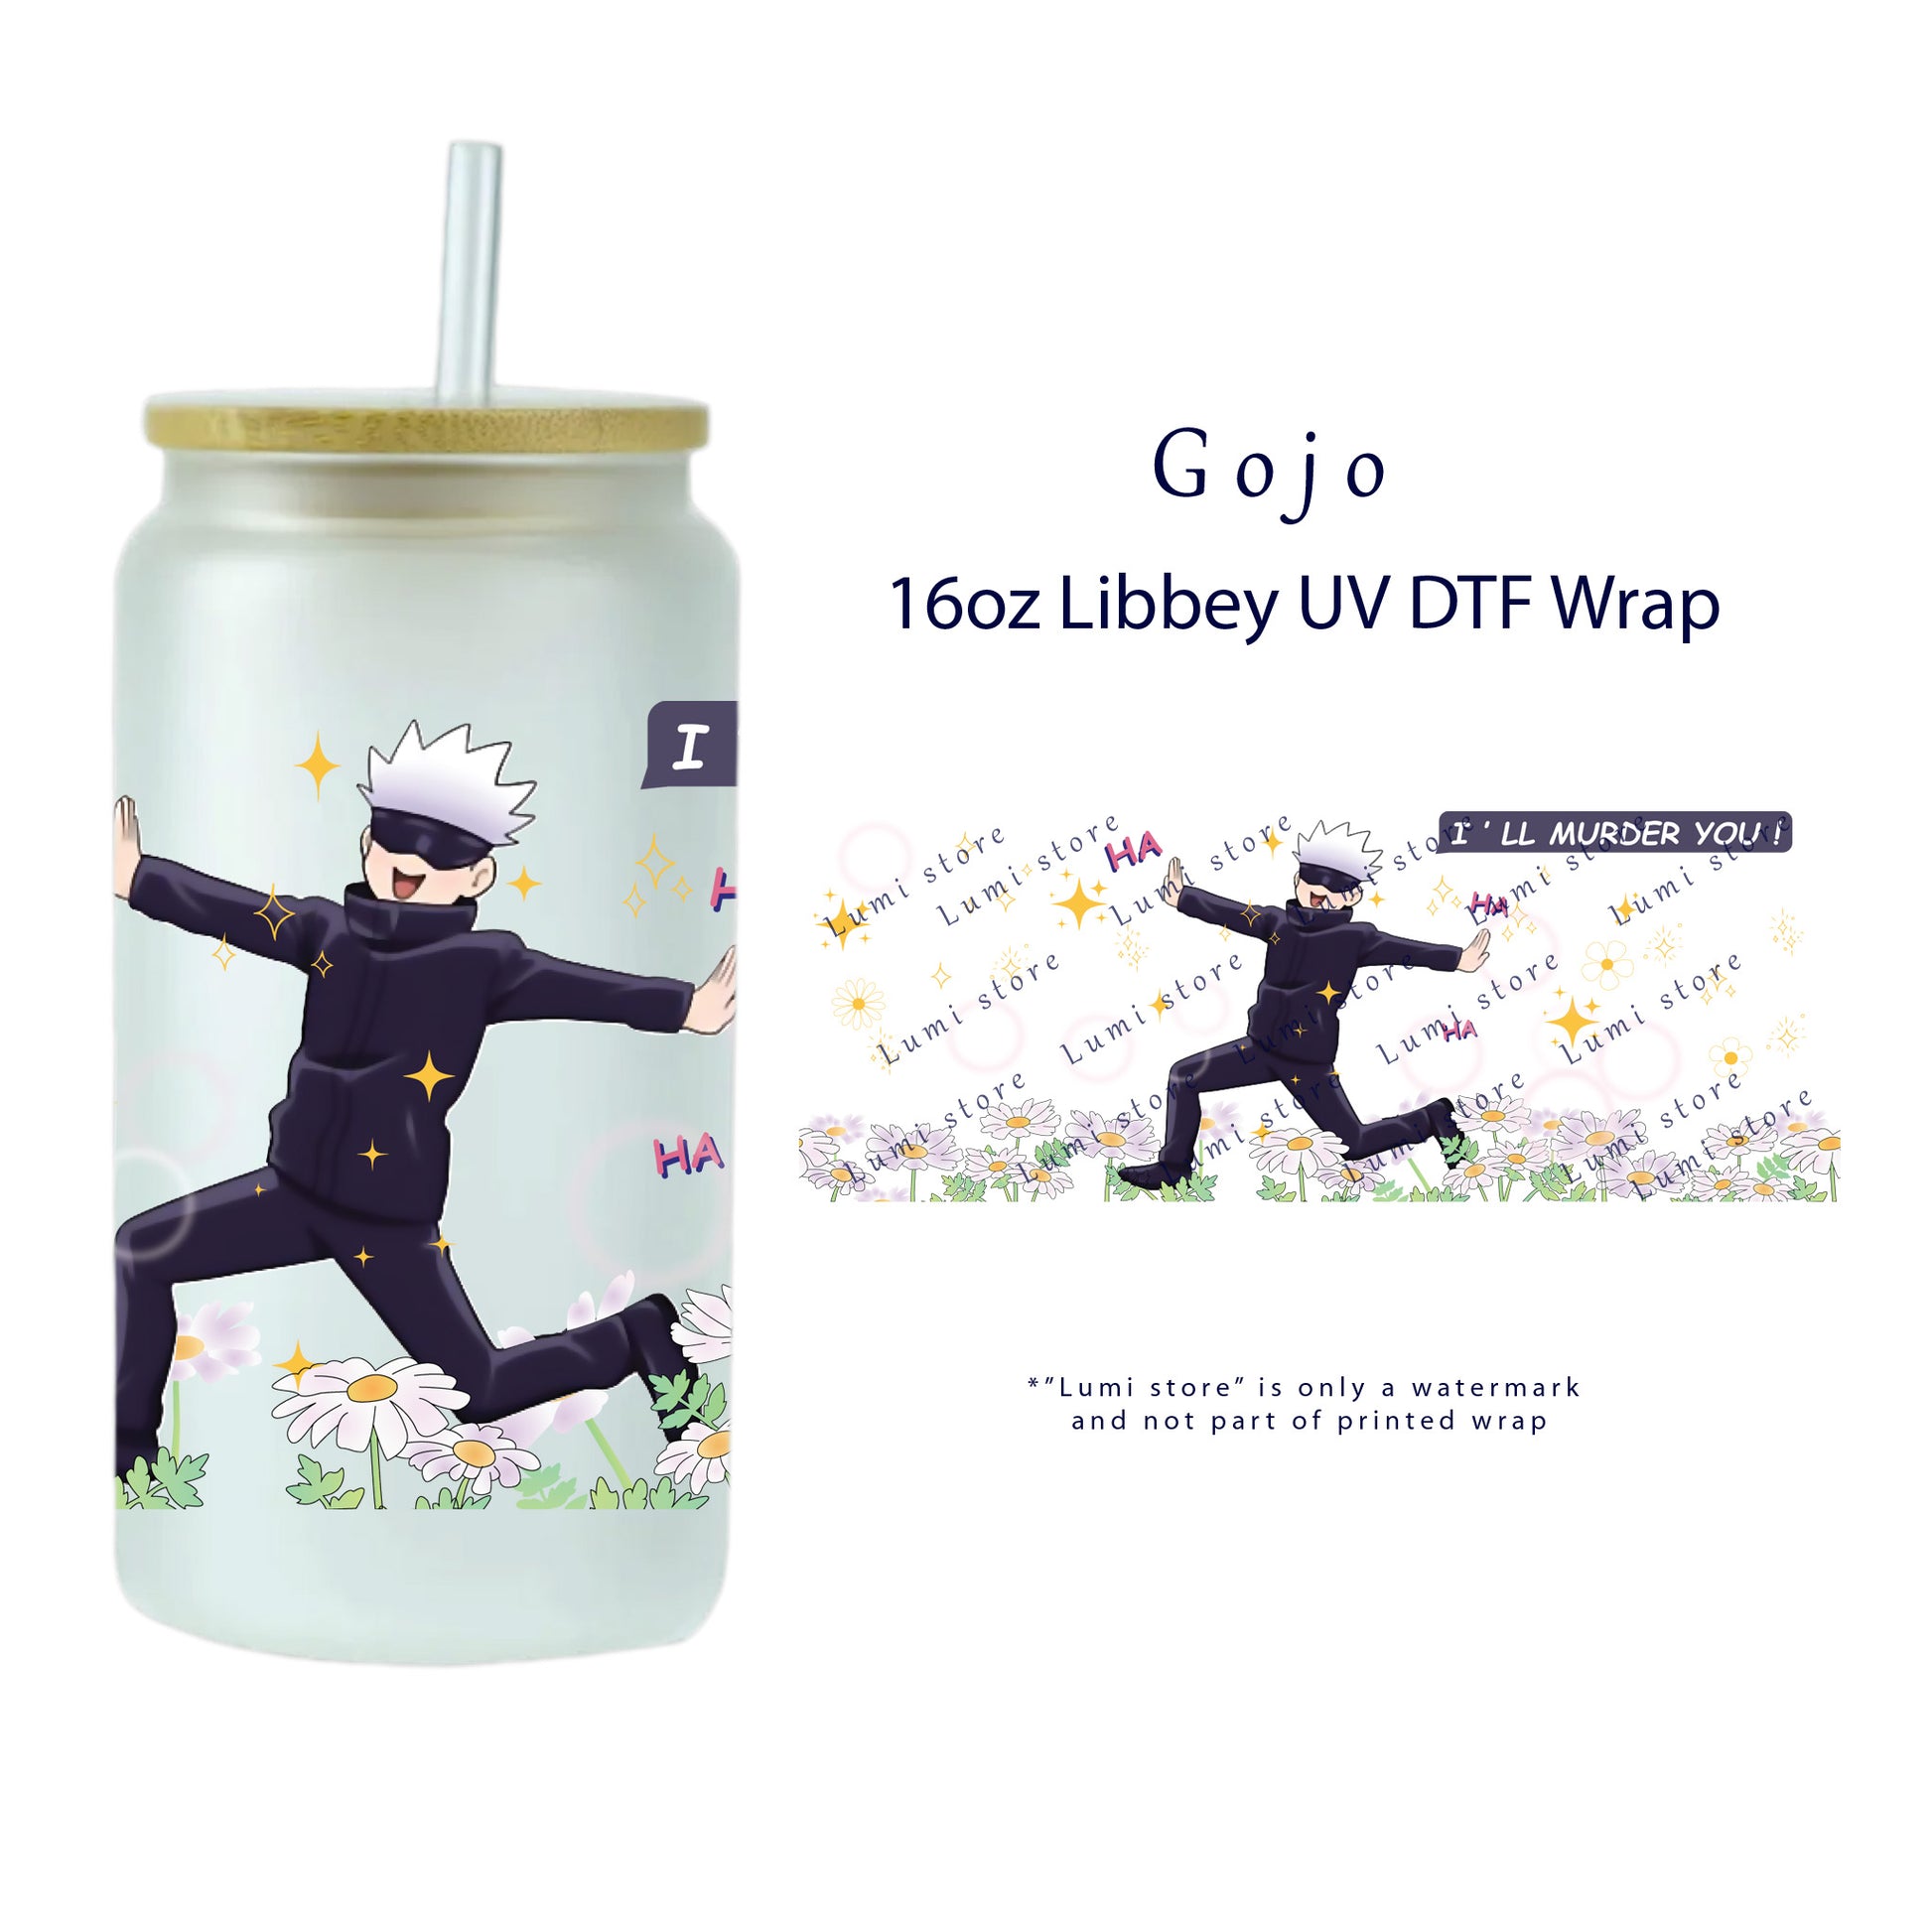 Elevate your 16oz Libbey Glass Can with our Gojo UV DTF Wrap/Transfer!  Easy to apply—no heat or weeding required. The instructions are simple. STICK, PEEL & GO! Transform glass and plastic cups, phone cases, notebooks, and more. Bring your favorite anime characters to life on everyday items. 